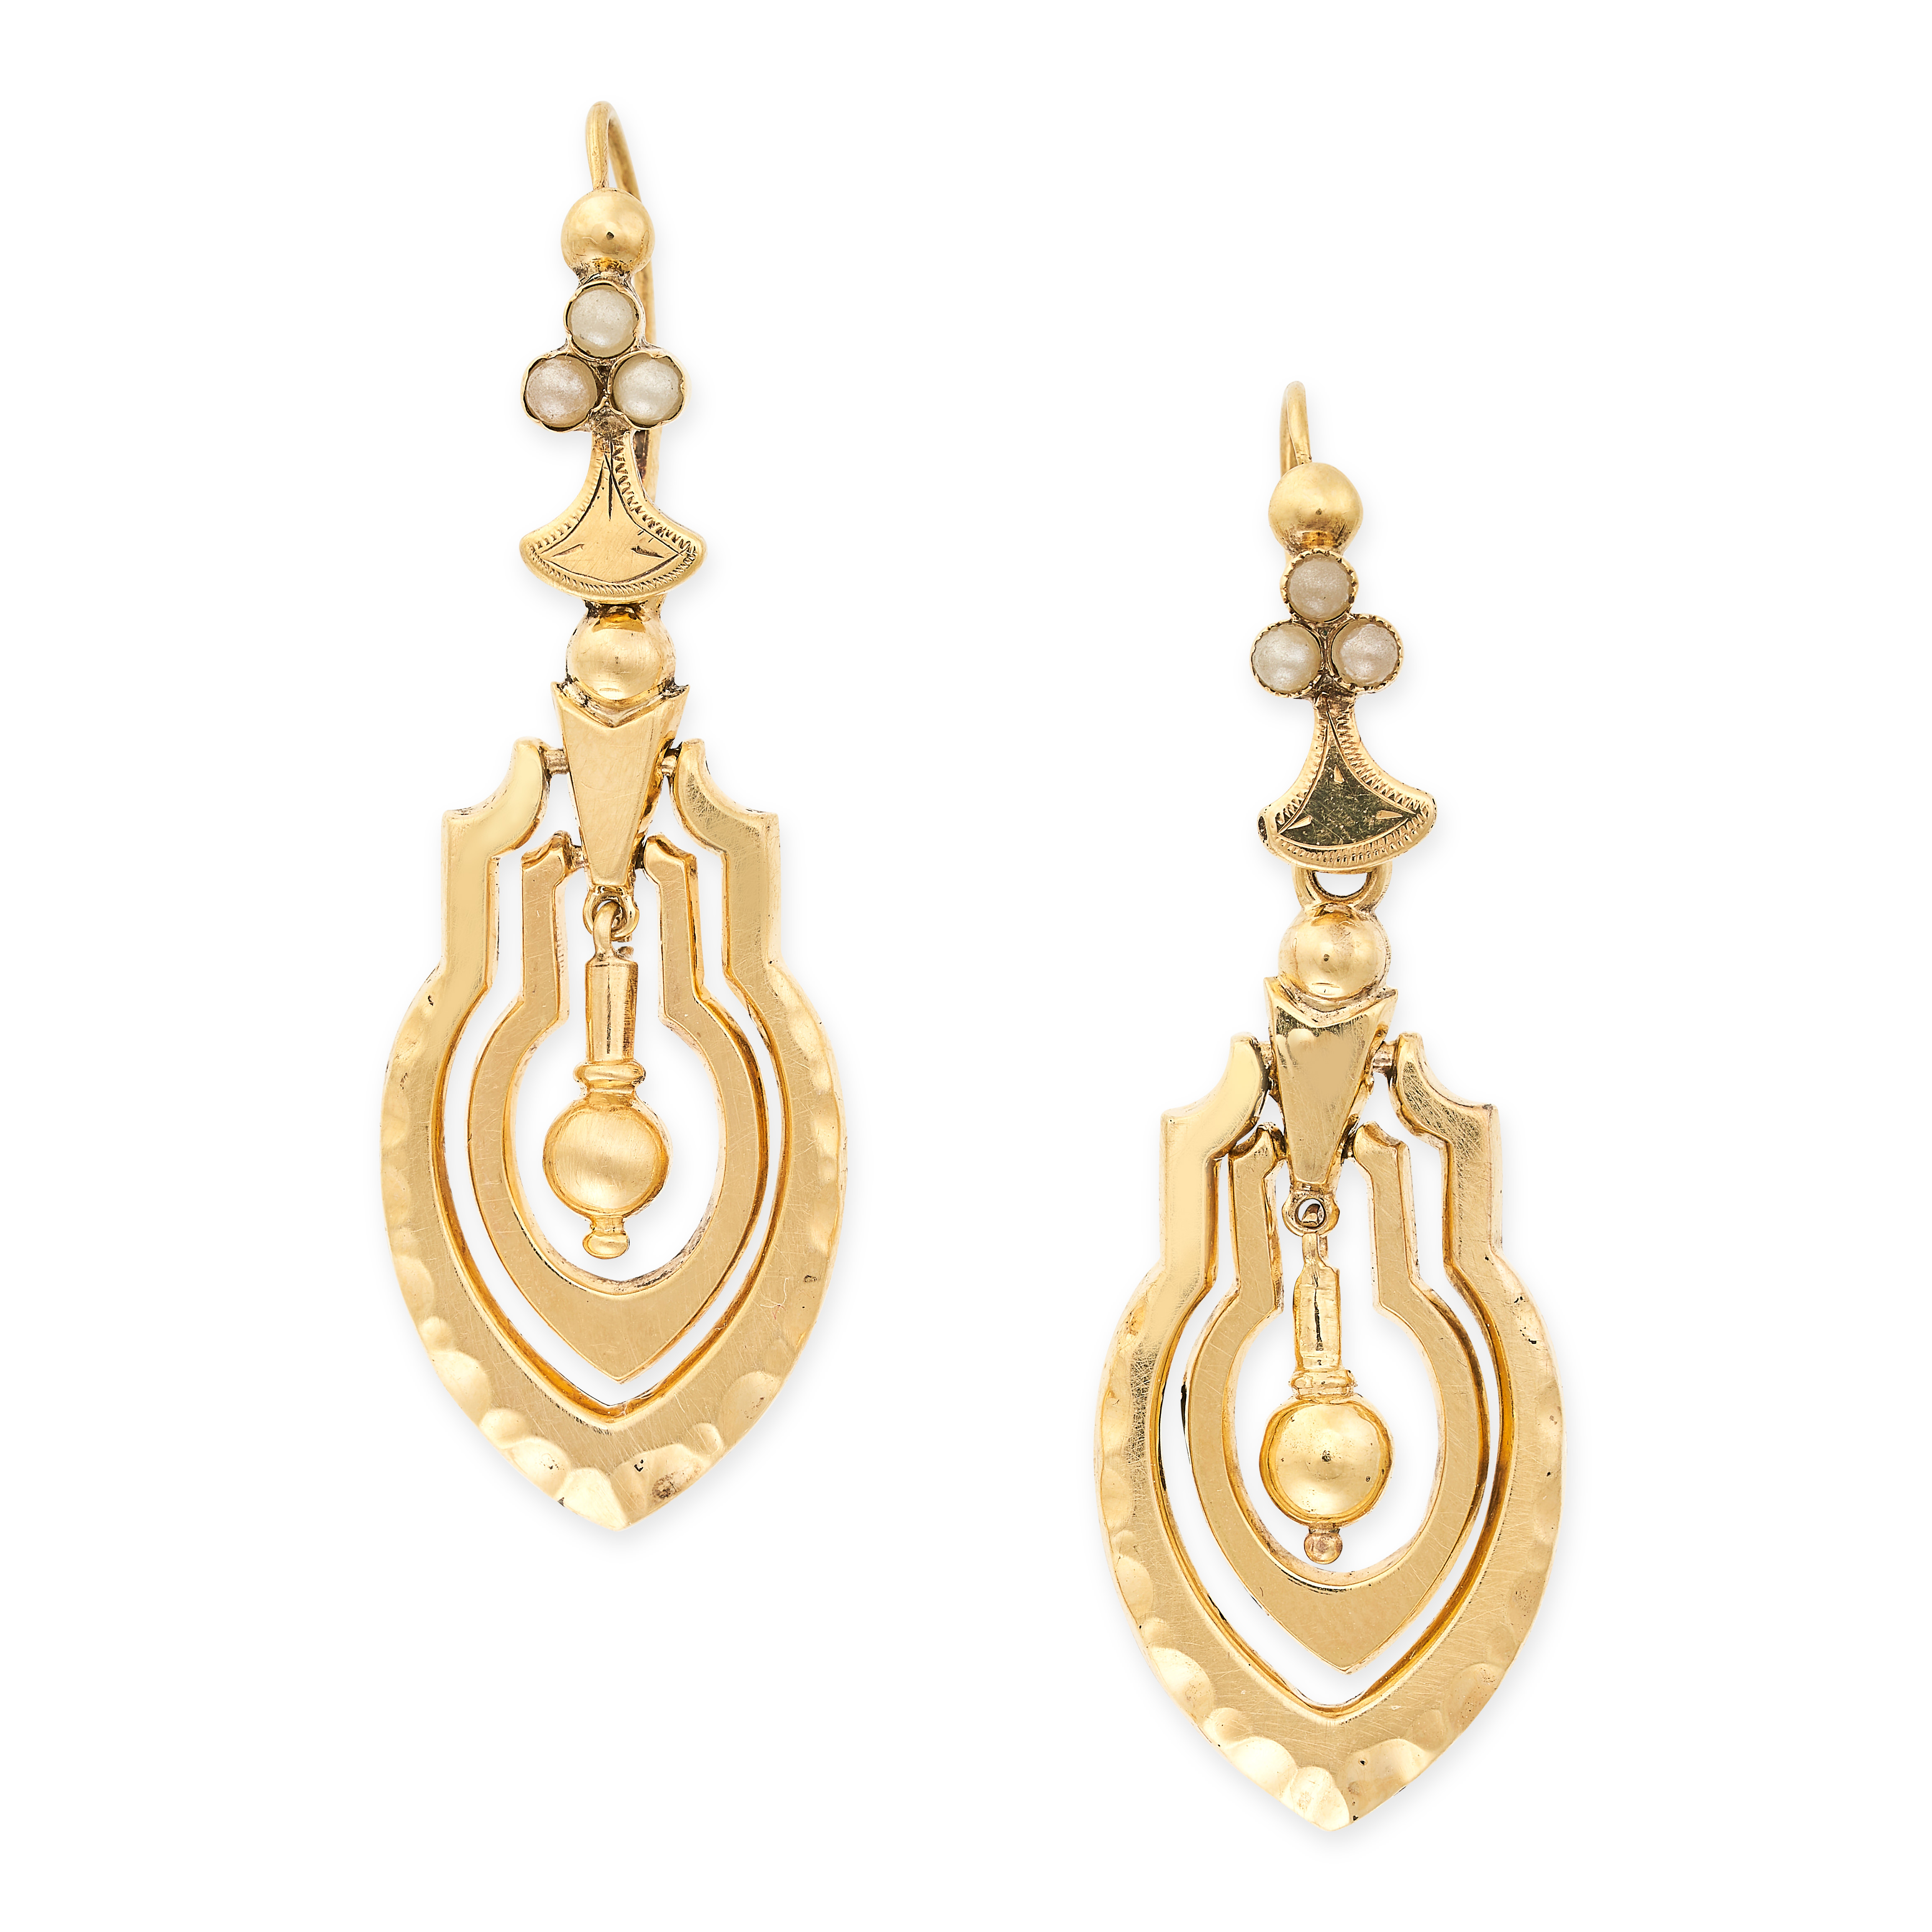 A PAIR OF ANTIQUE PEARL DROP EARRINGS in yellow gold, the articulated bodies accented above by trios